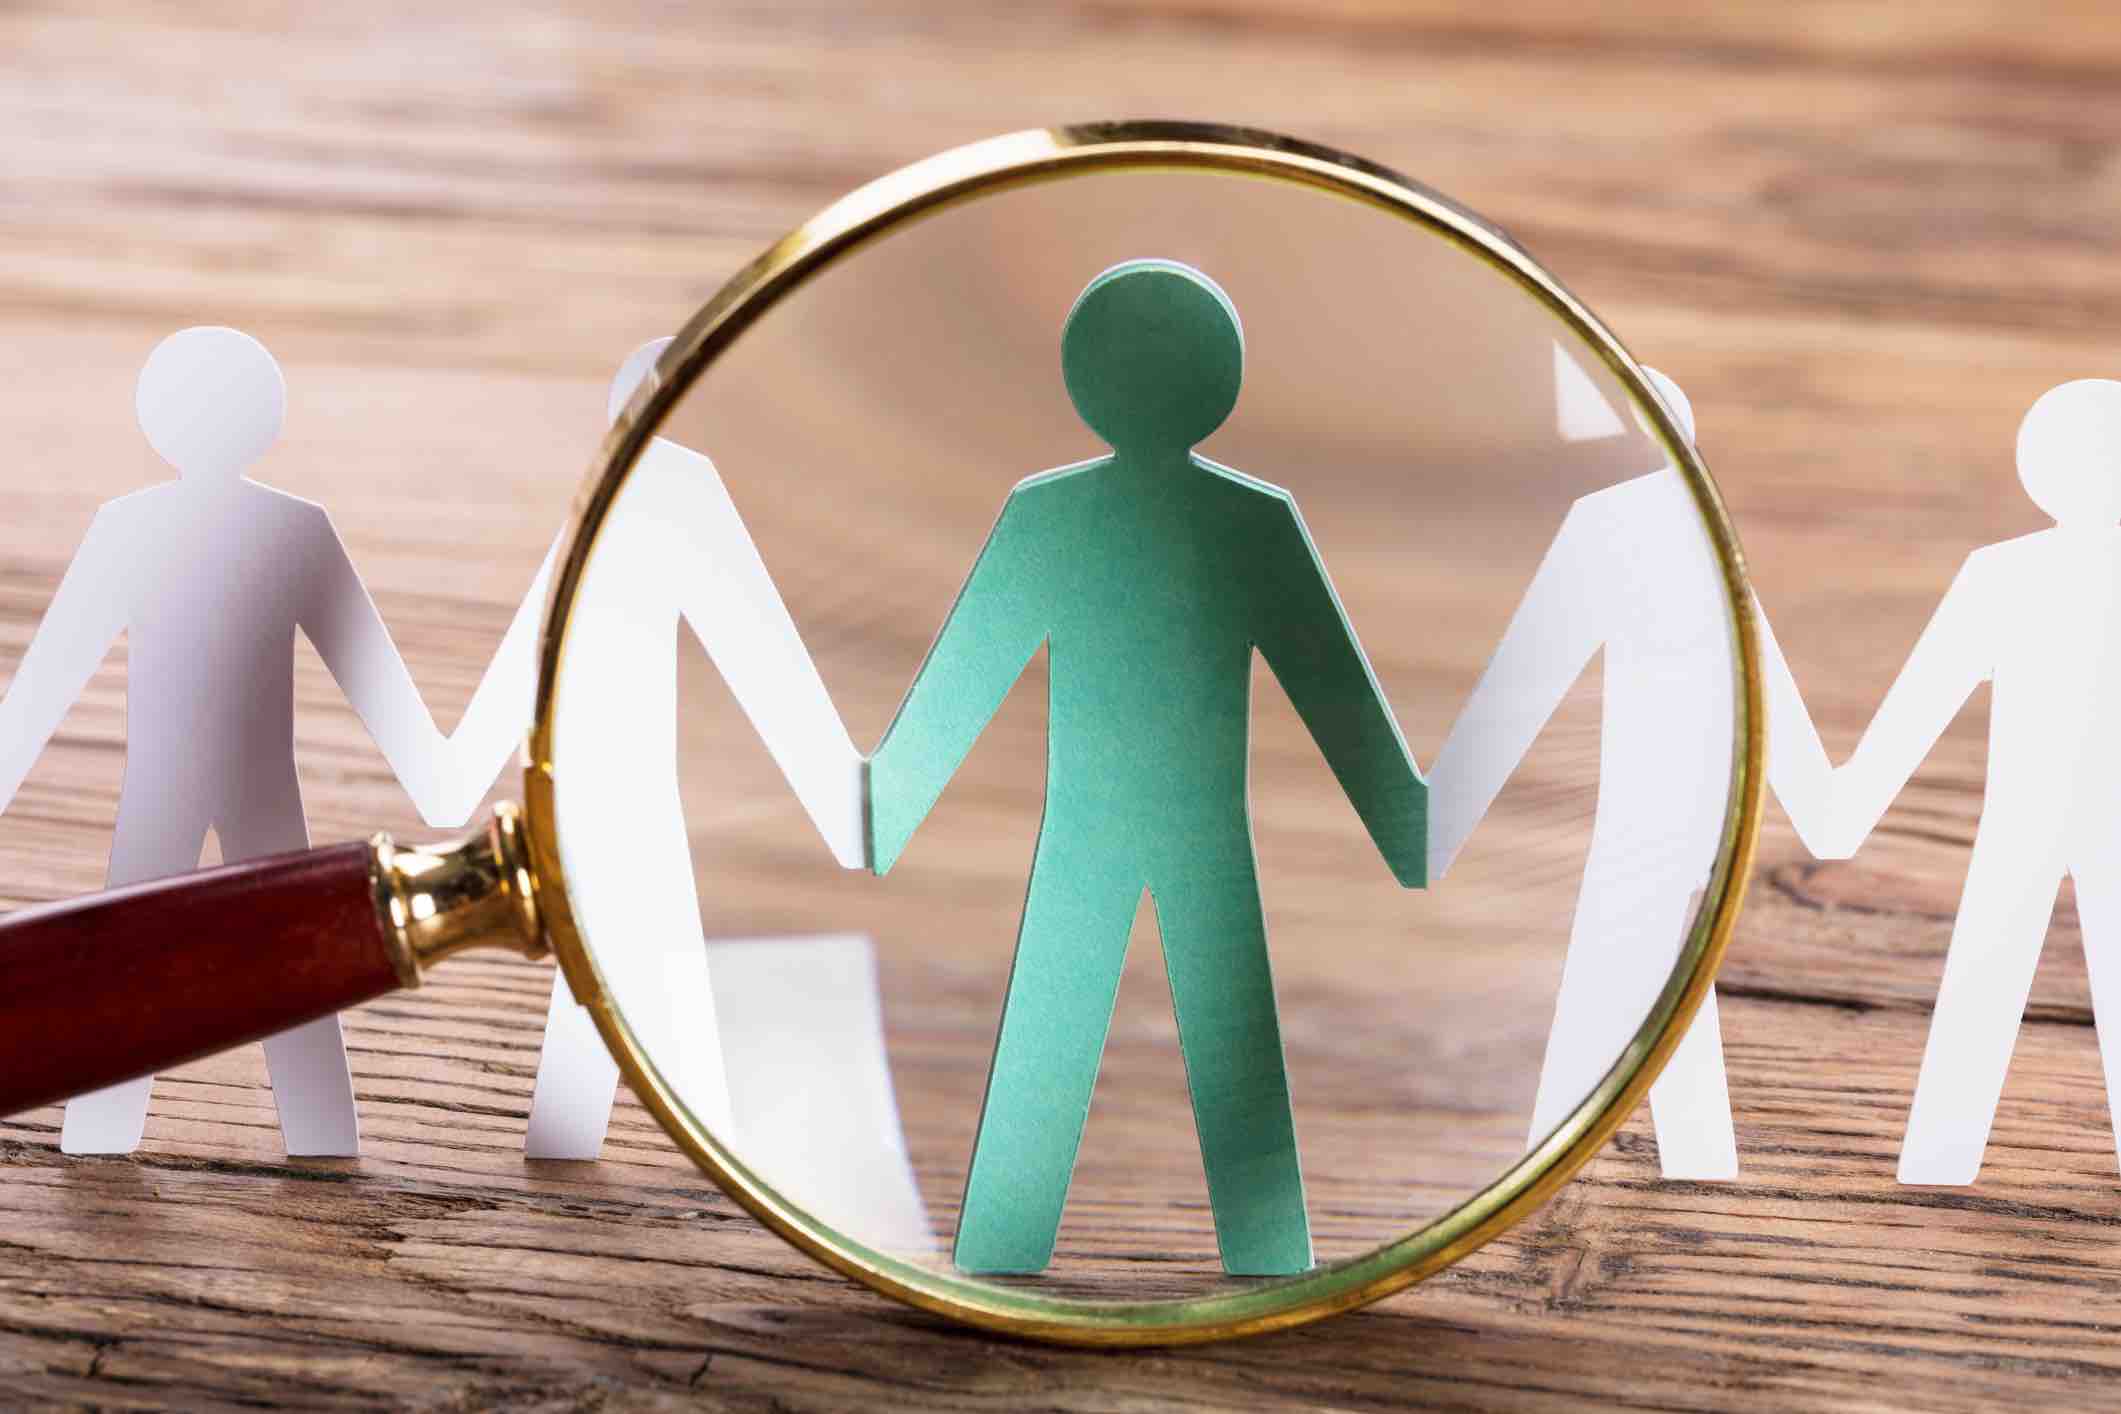 Magnifying Glass On Cut-out Figures